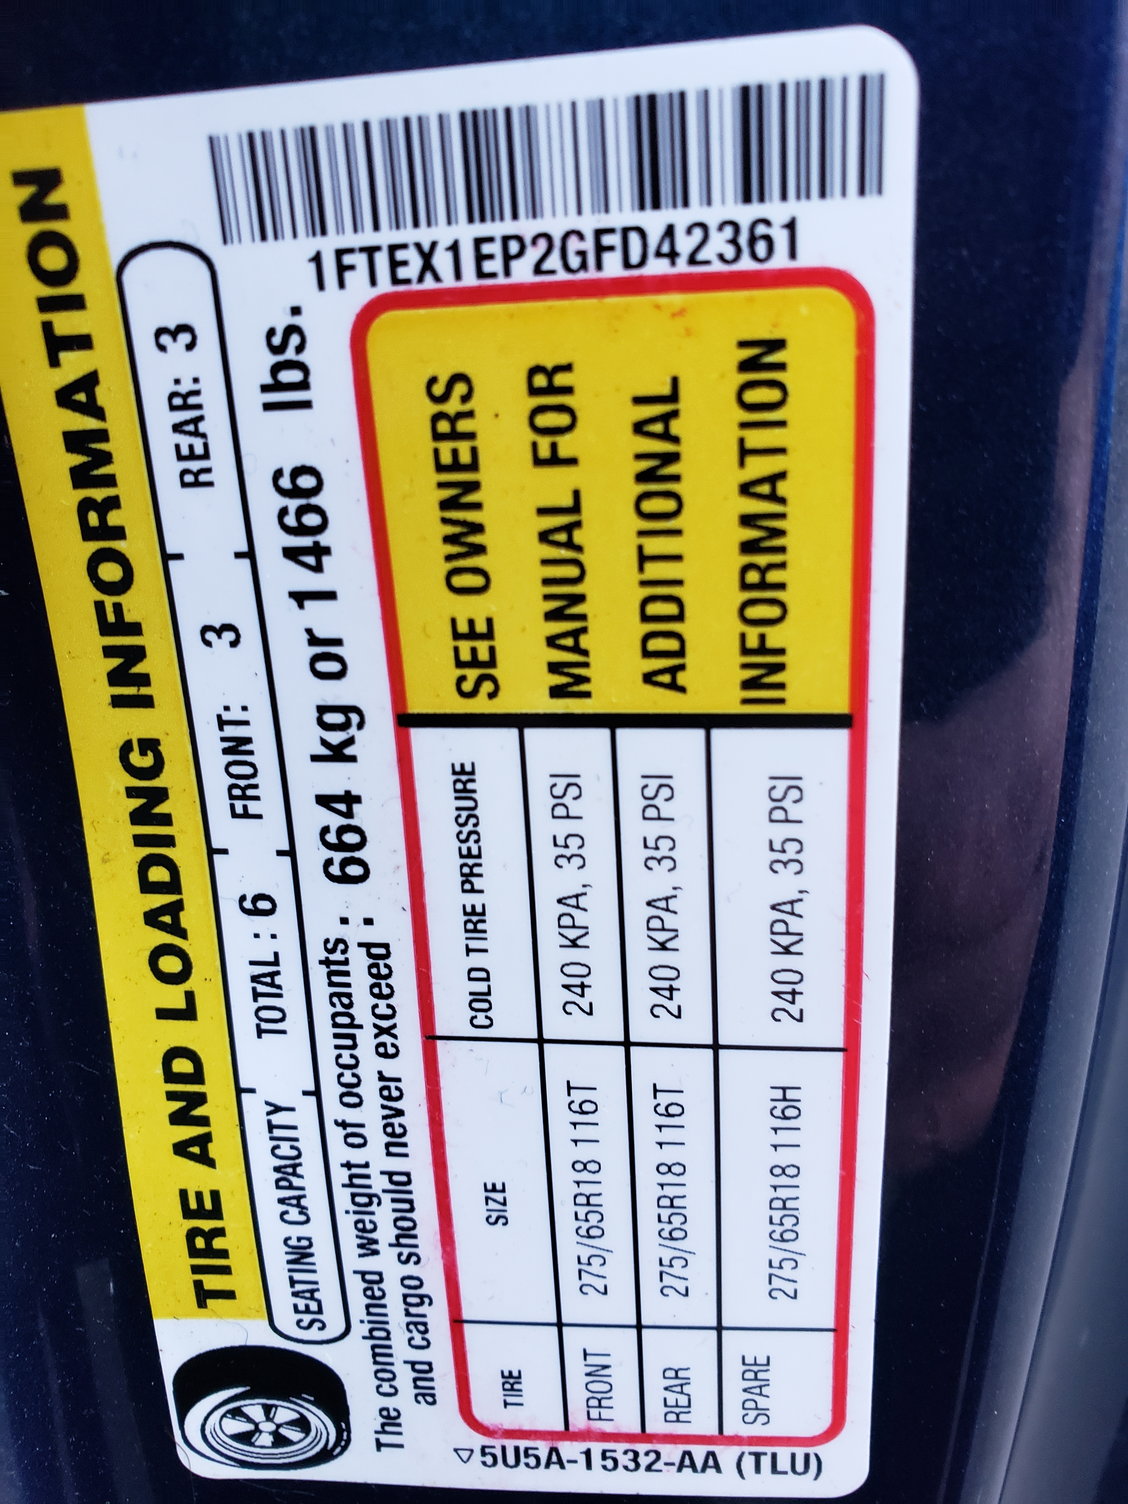 2016 F150 towing and gear ratio questions... - Page 2 - Ford F150 Forum 3.31 Vs 3.55 Gear Ratio F150